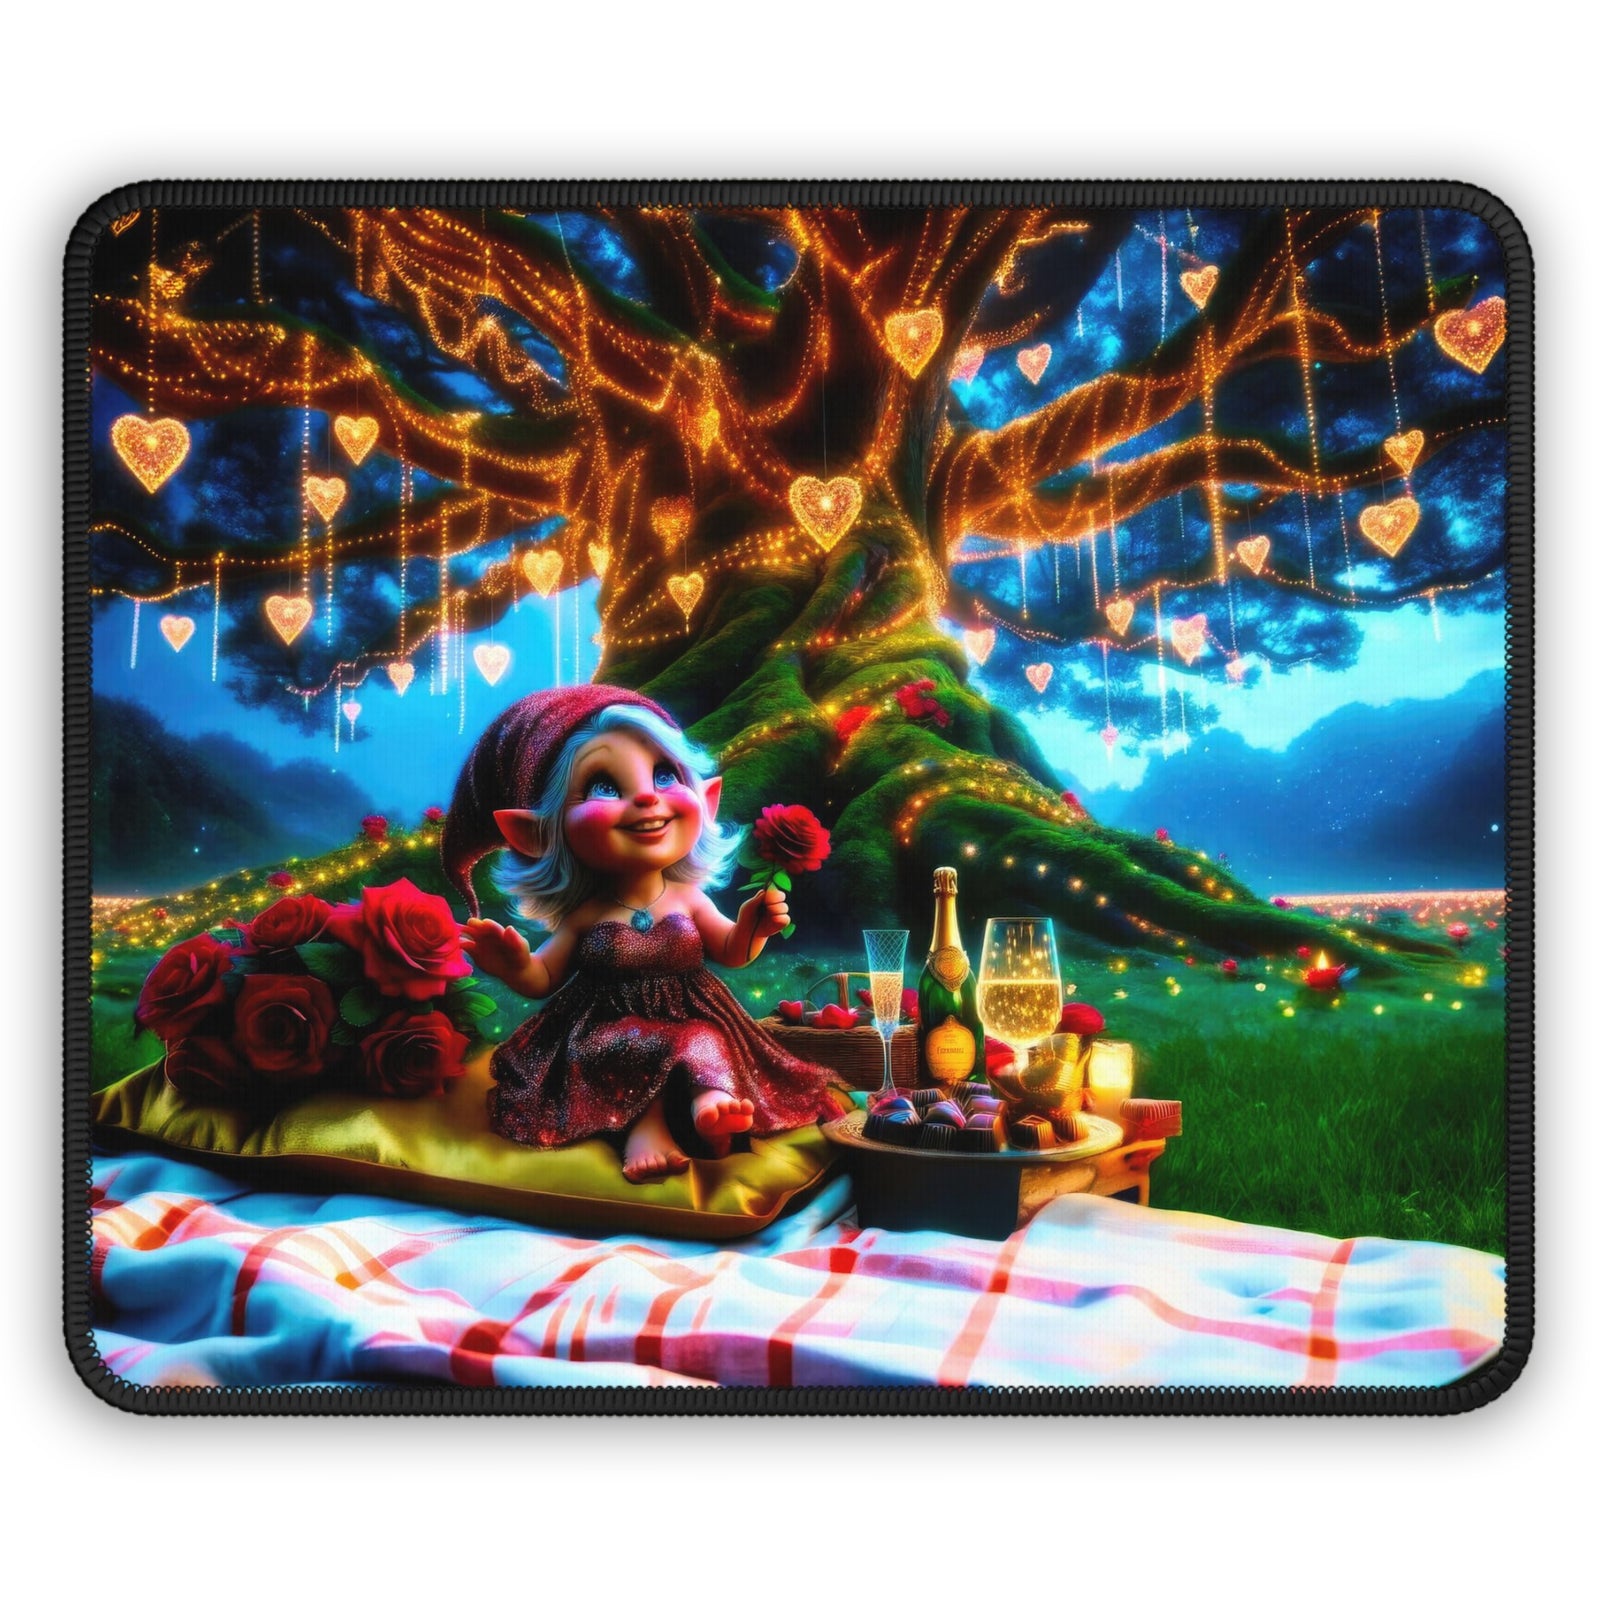 Iceglitter's Enchanting Valentine Gaming Mouse Pad